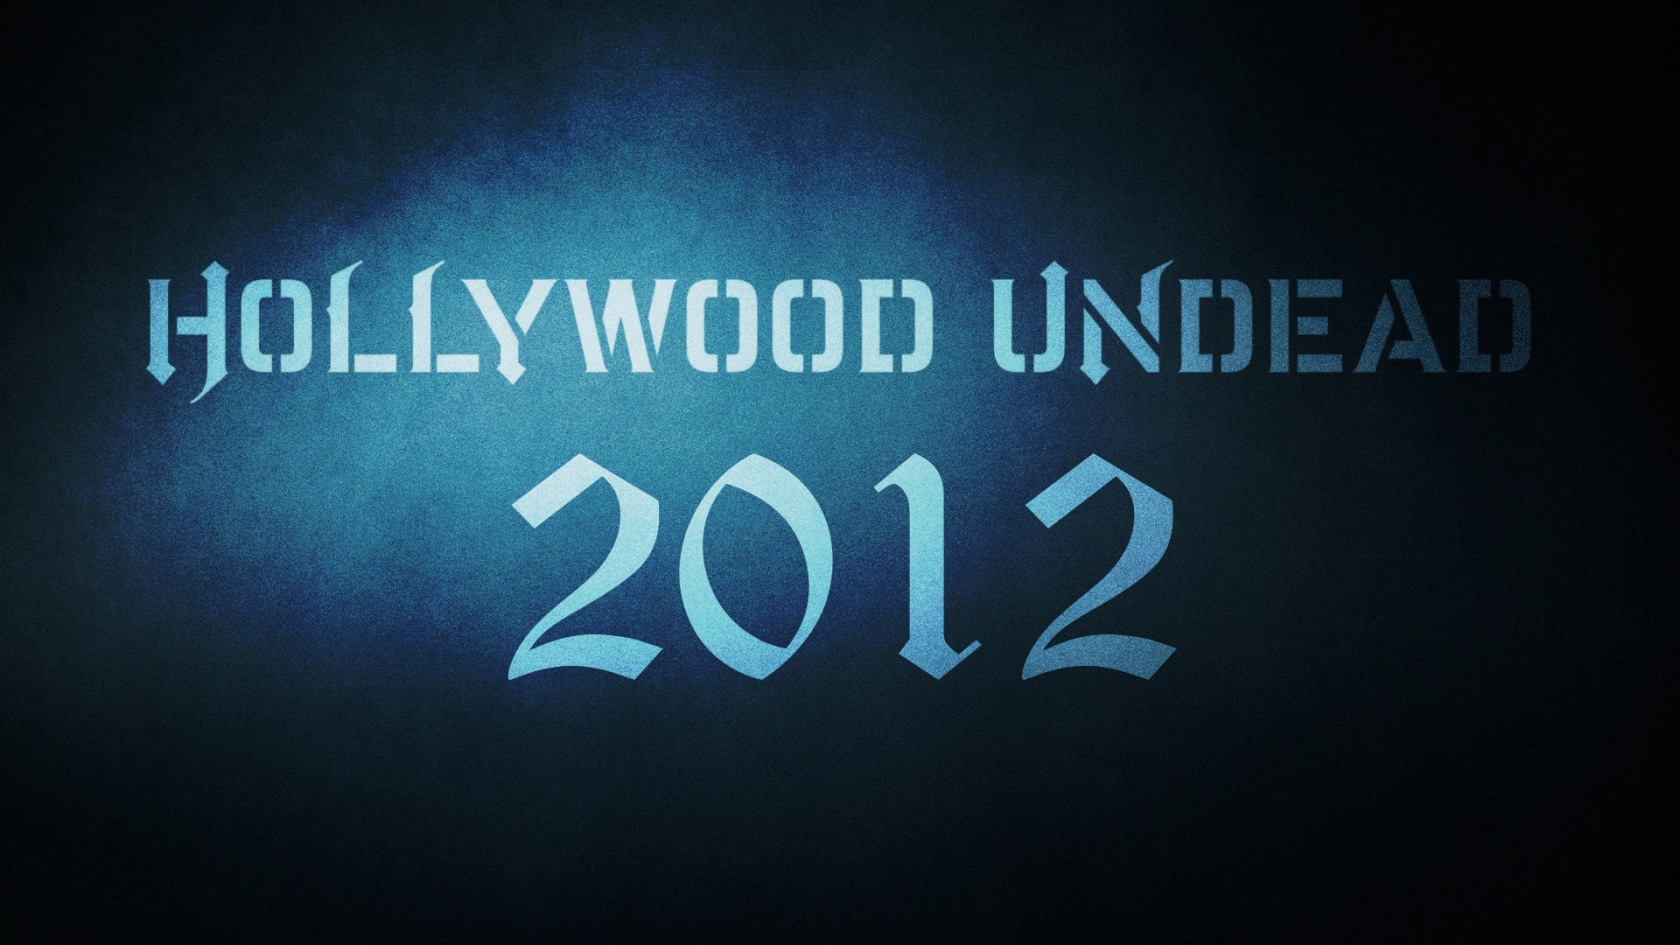 Hollywood Undead 2012 for 1680 x 945 HDTV resolution